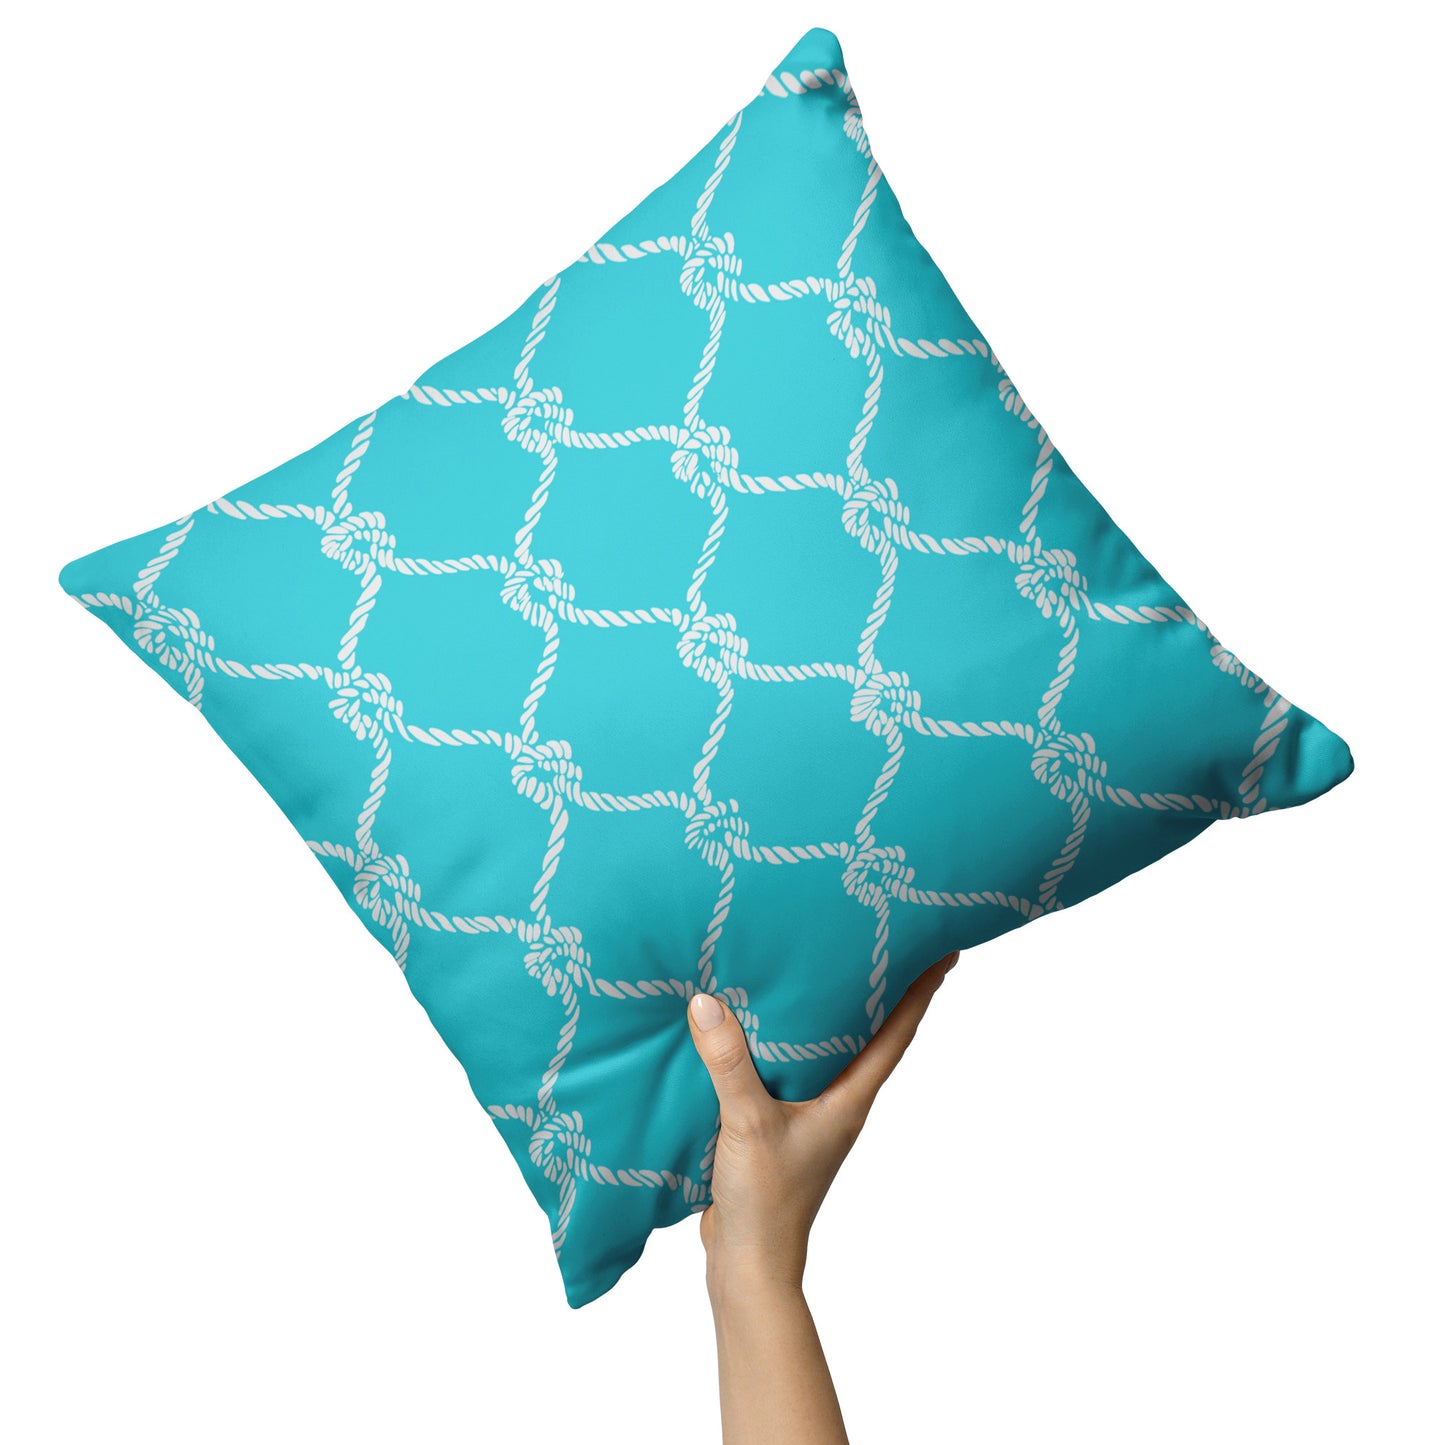 Nautical Netting Design on Tropical Blue Background, Throw Pillow